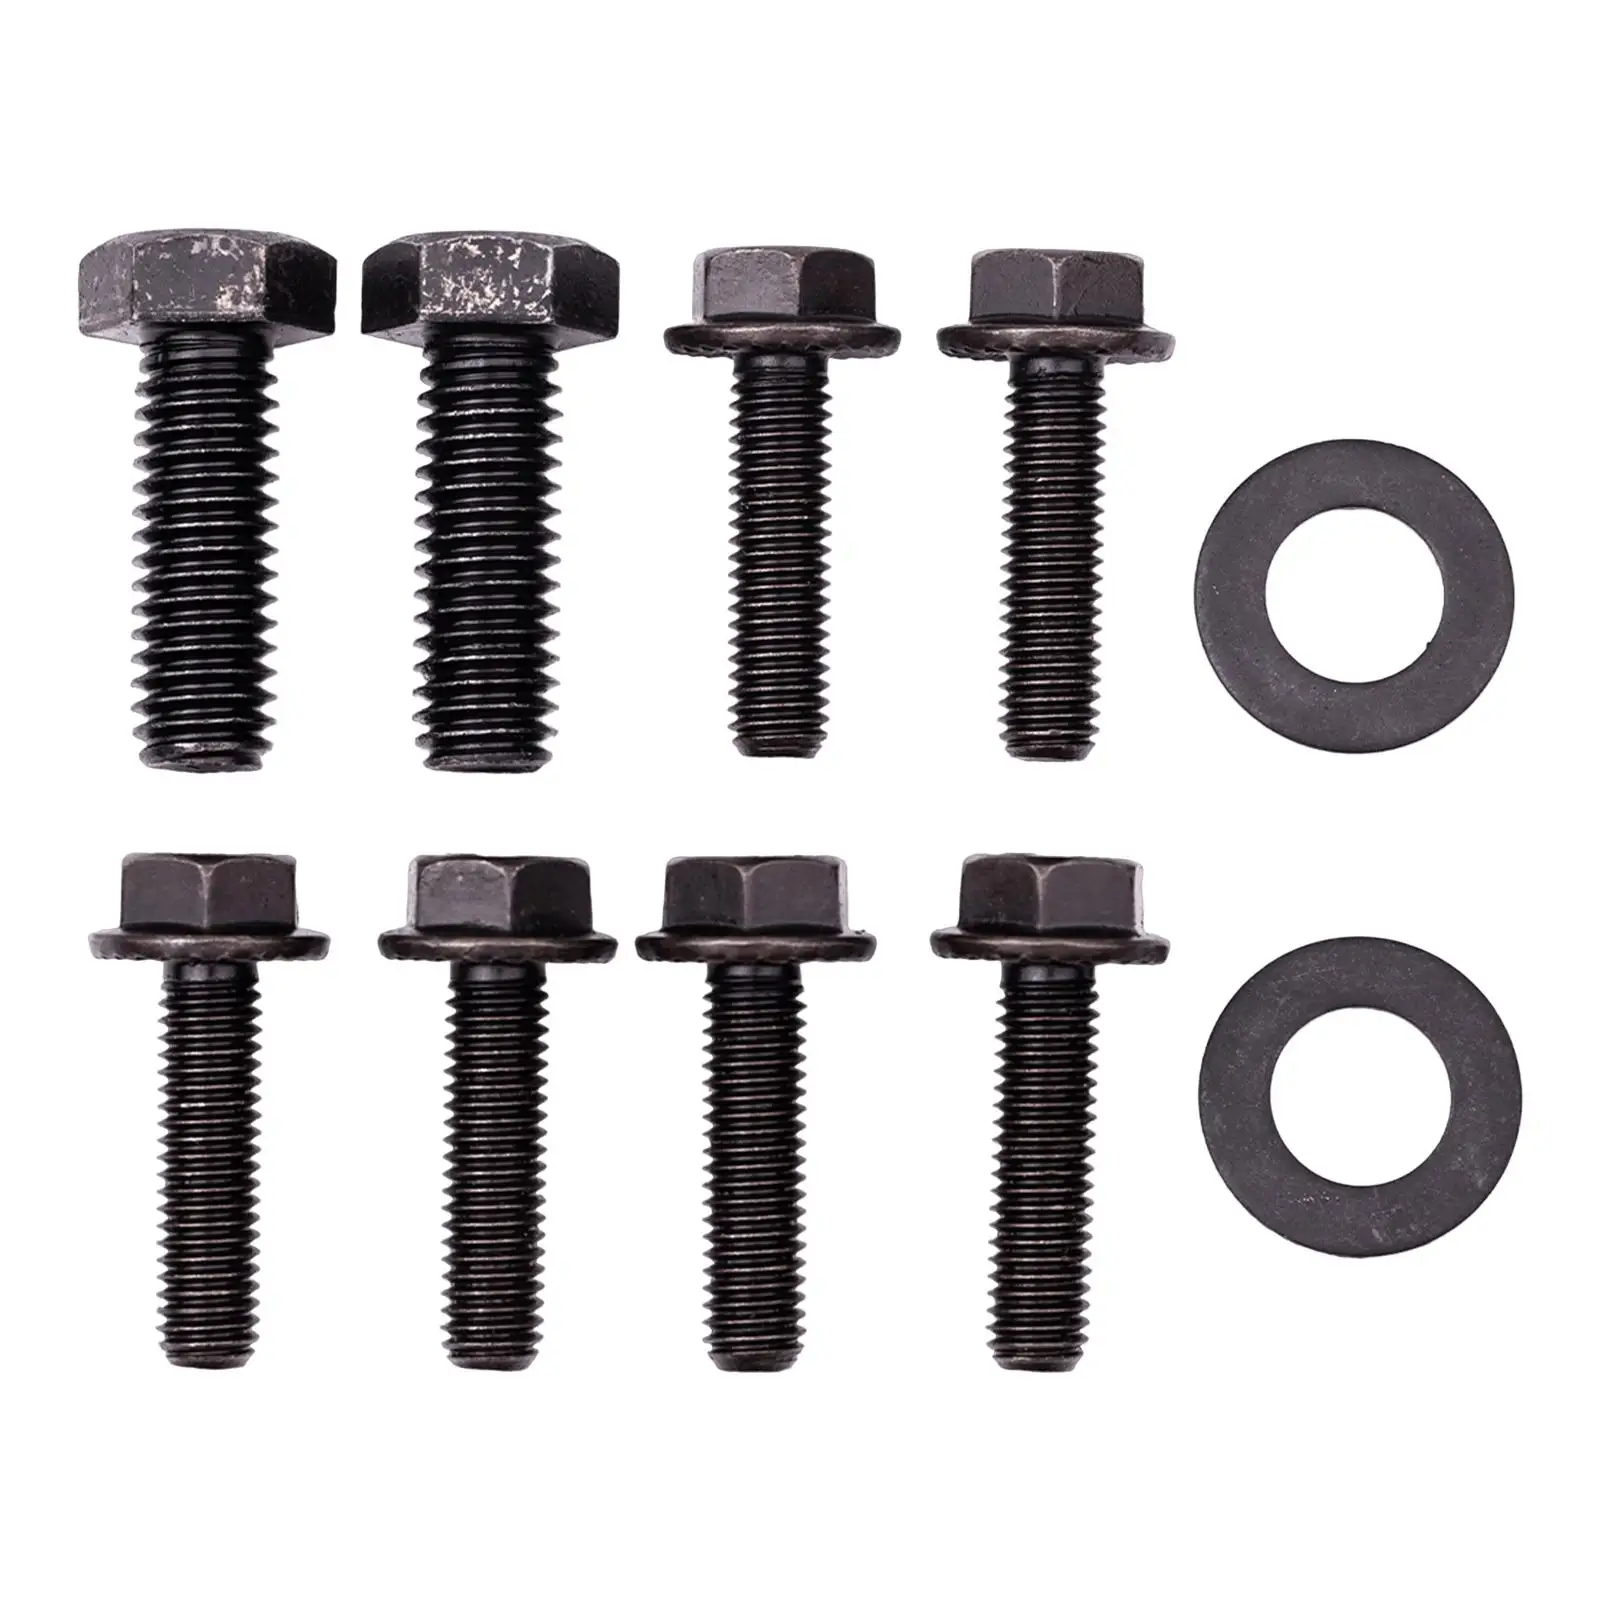 Front Seat Mounting Bolts Fittings Heavy Duty Direct Replaces Vehicle Driver and Passenger for Jeep Wrangler TJ 1997-2006